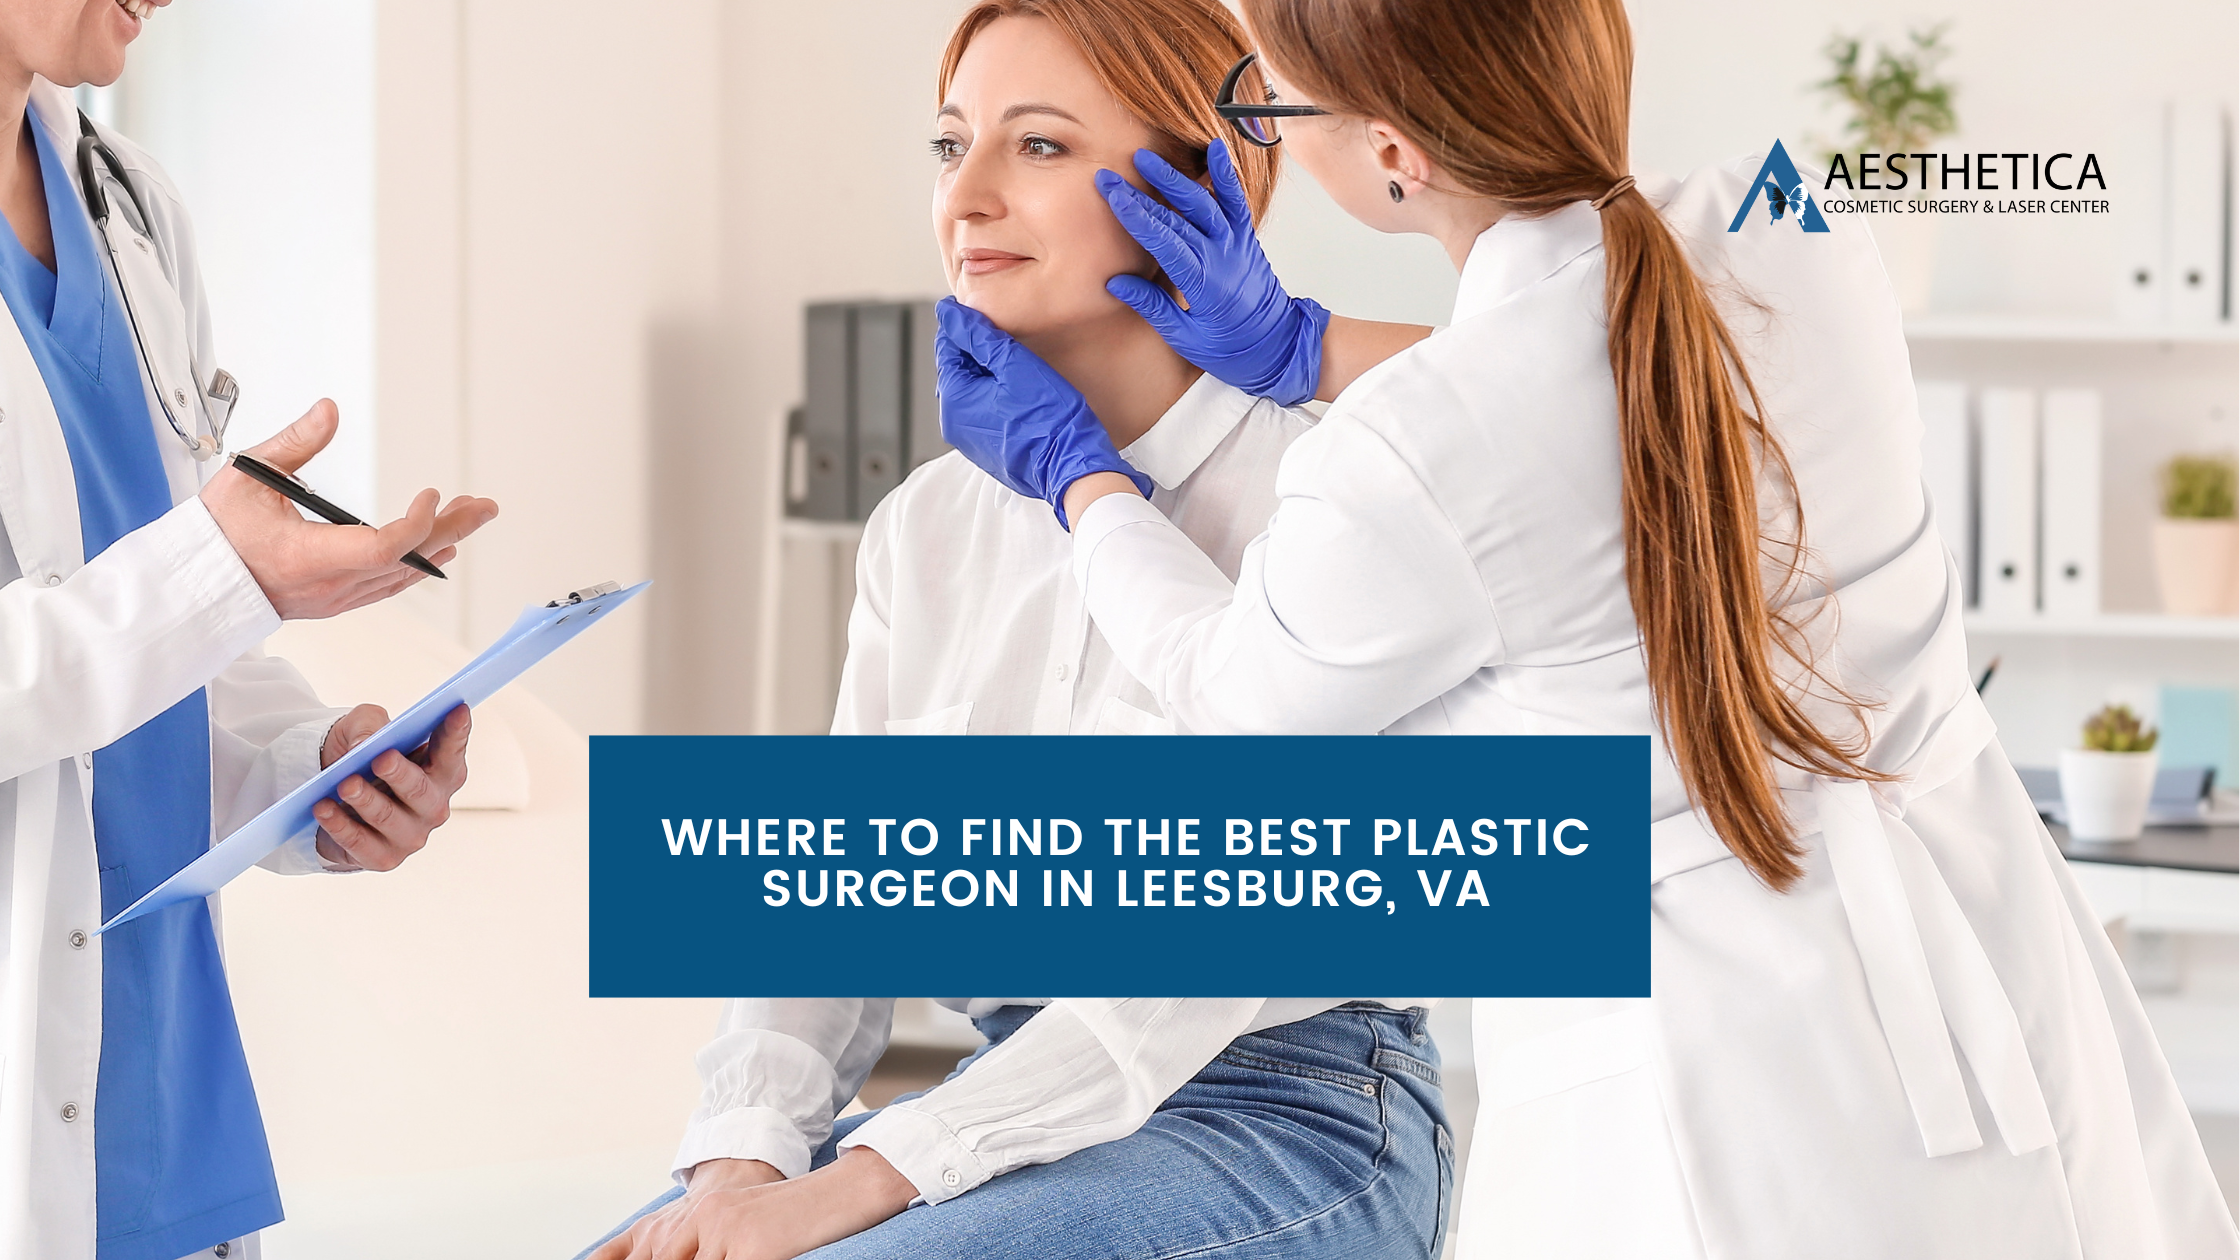 Where To Find the Best Plastic Surgeon in Leesburg, VA